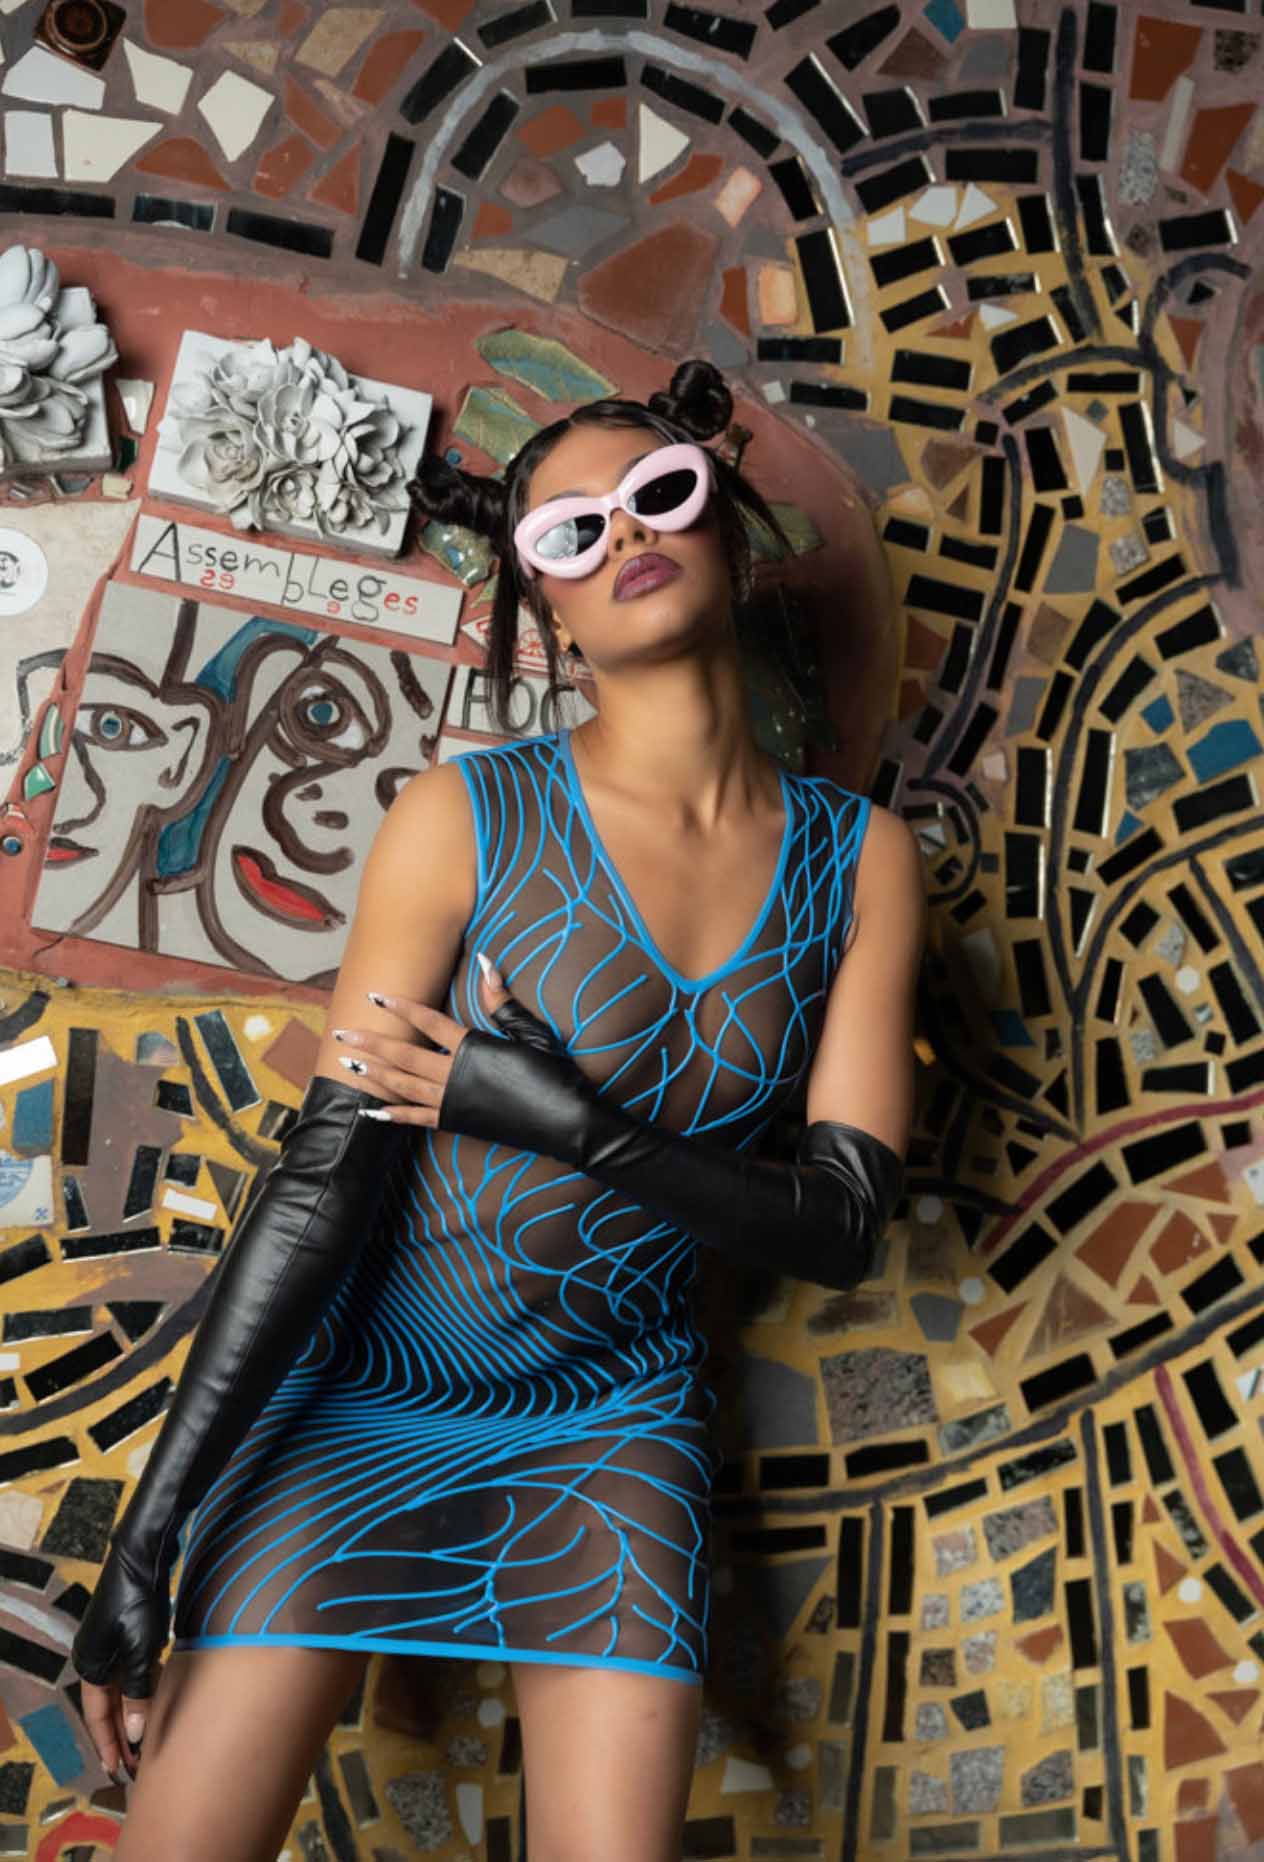 Model against mosaic wall wearing datex mesh dress with swirl pattern and elbow length black gloves